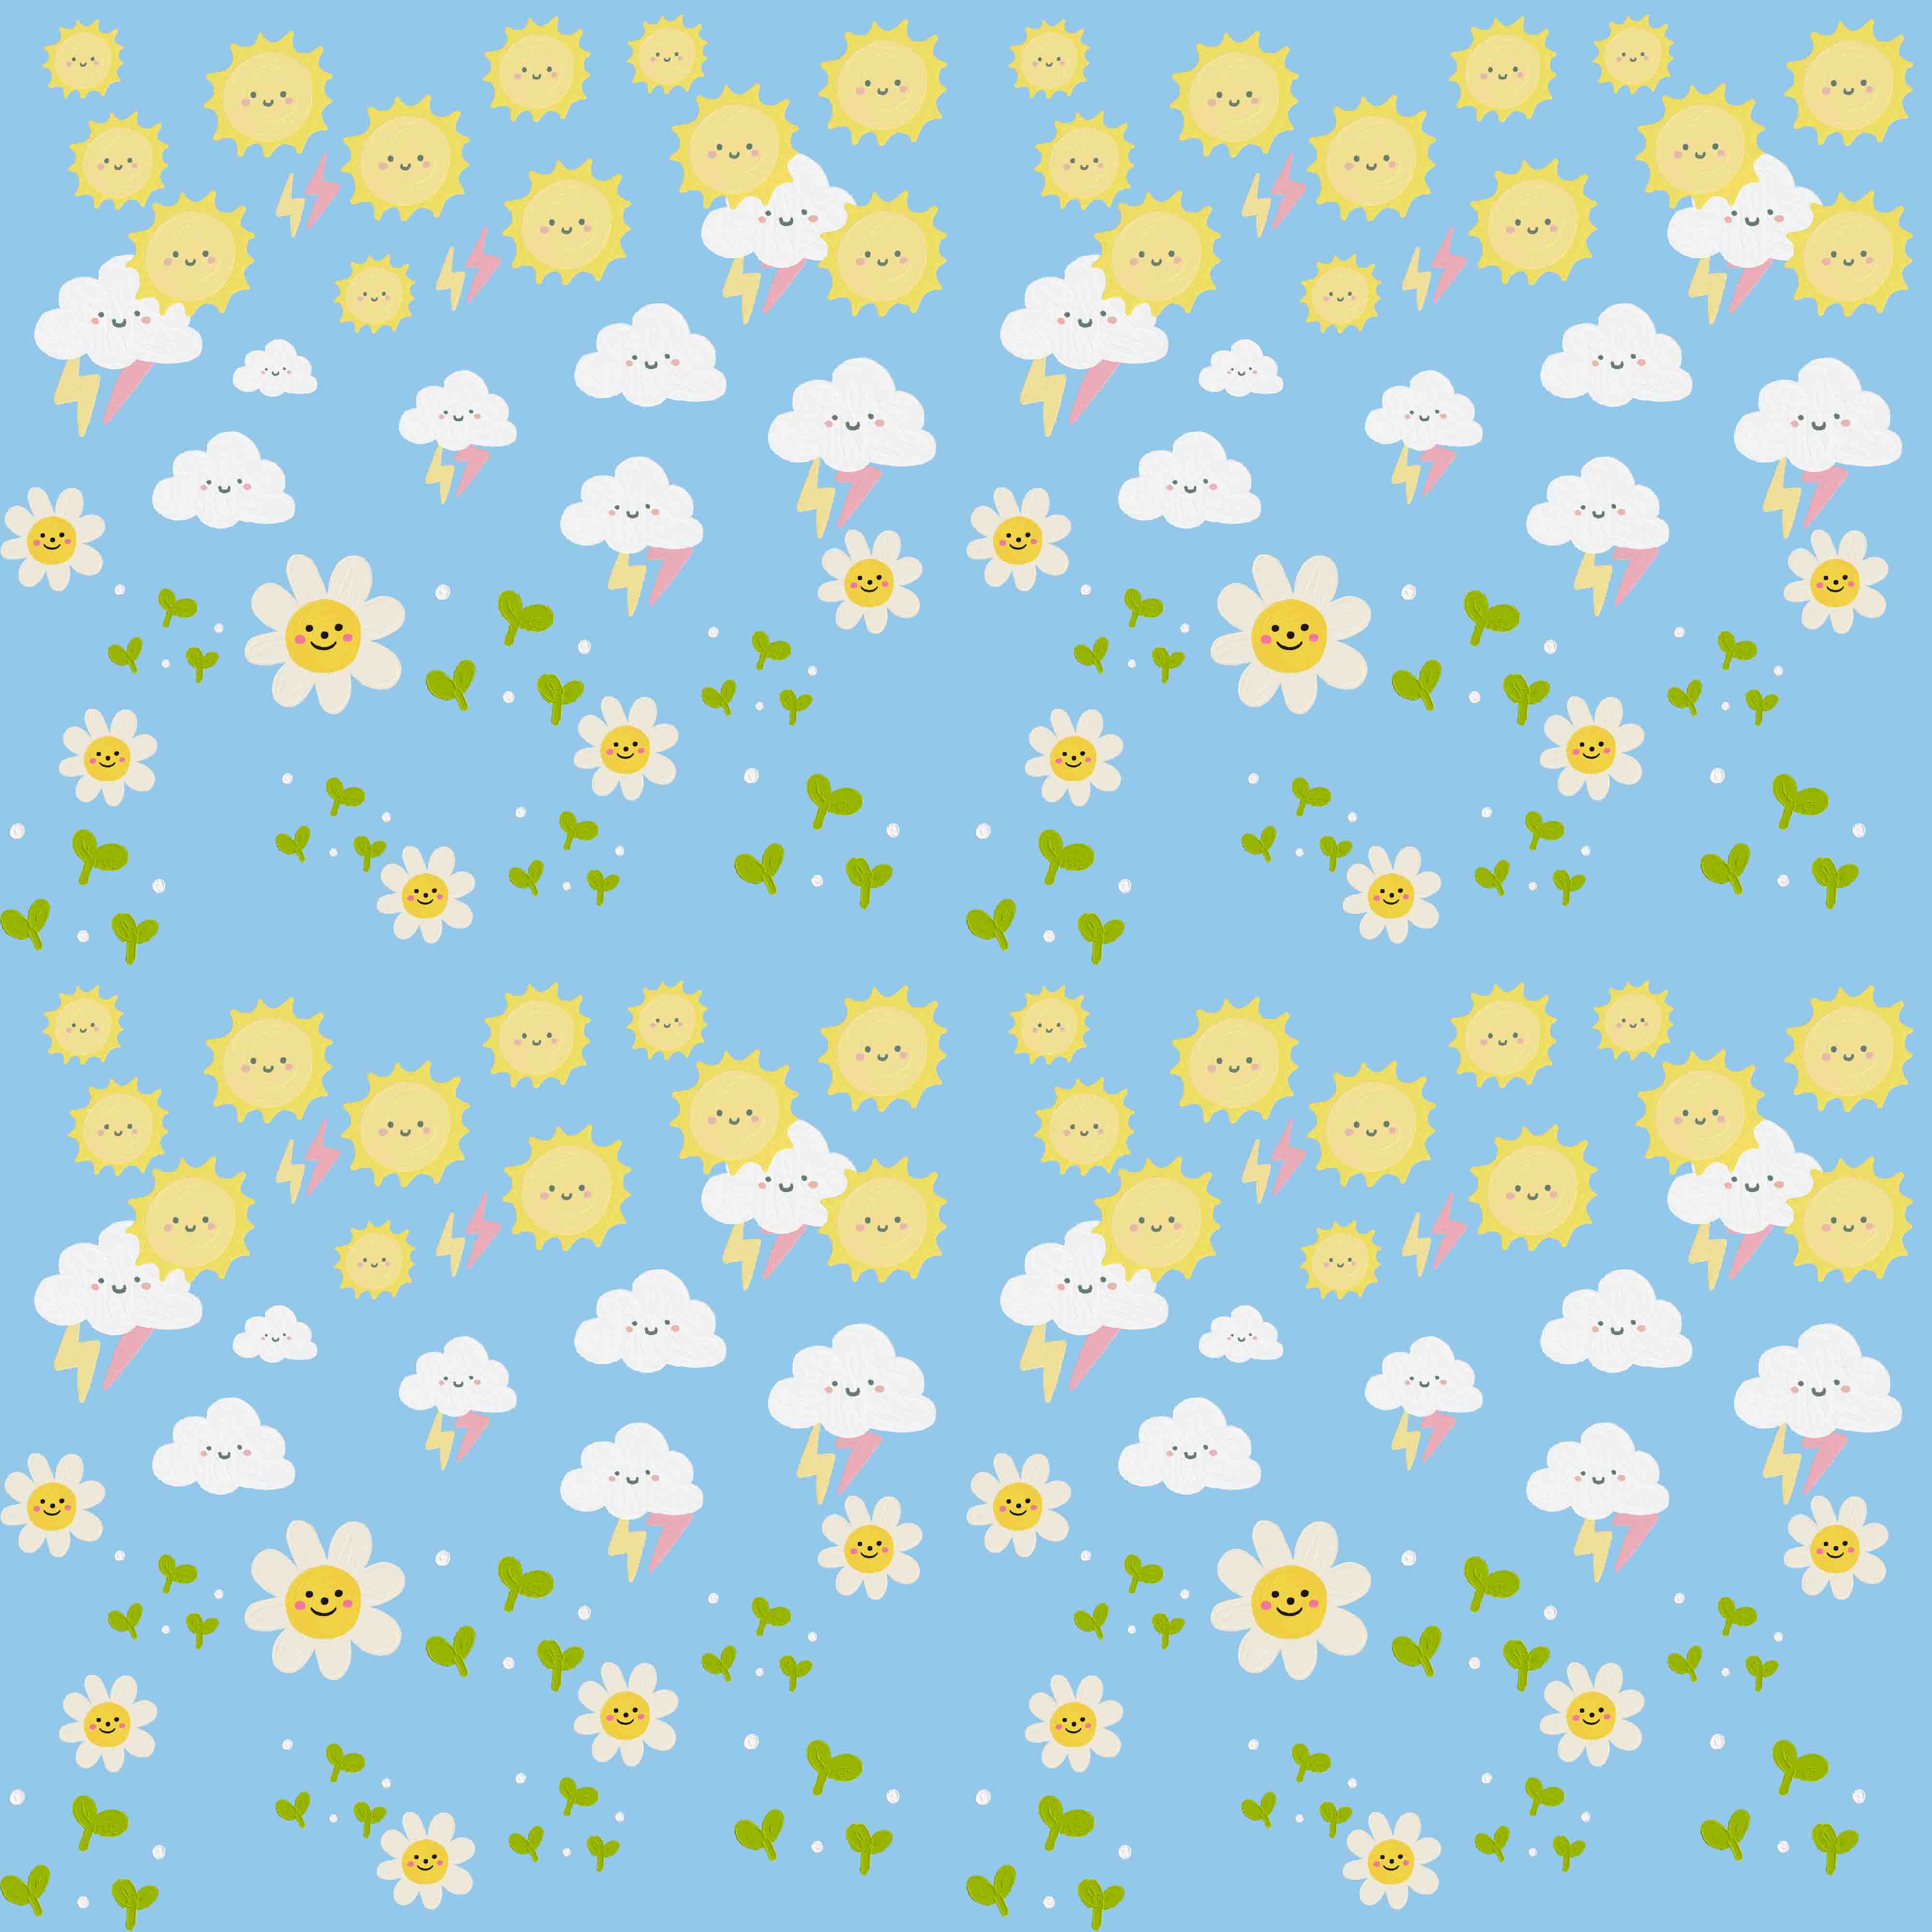 Pattern of clouds and sunflowers on a blue background.